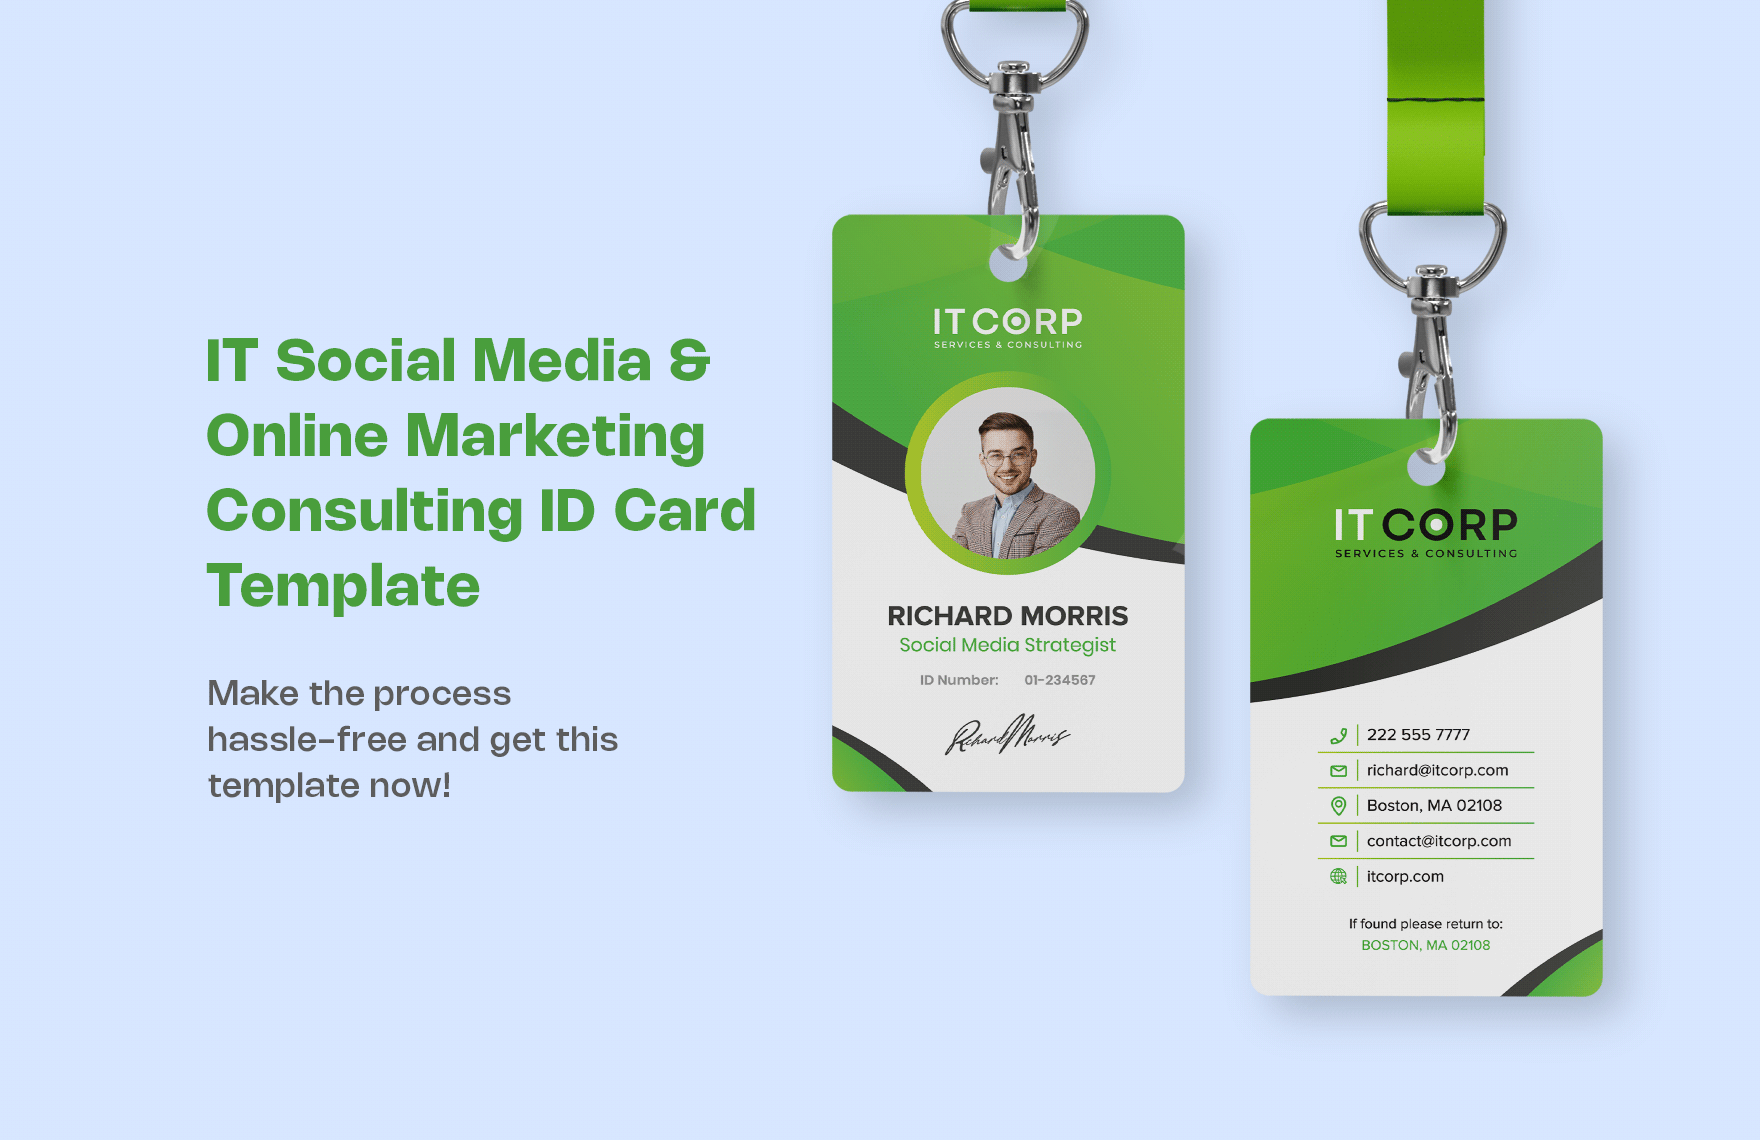 IT Social Media & Online Marketing Consulting ID Card Template